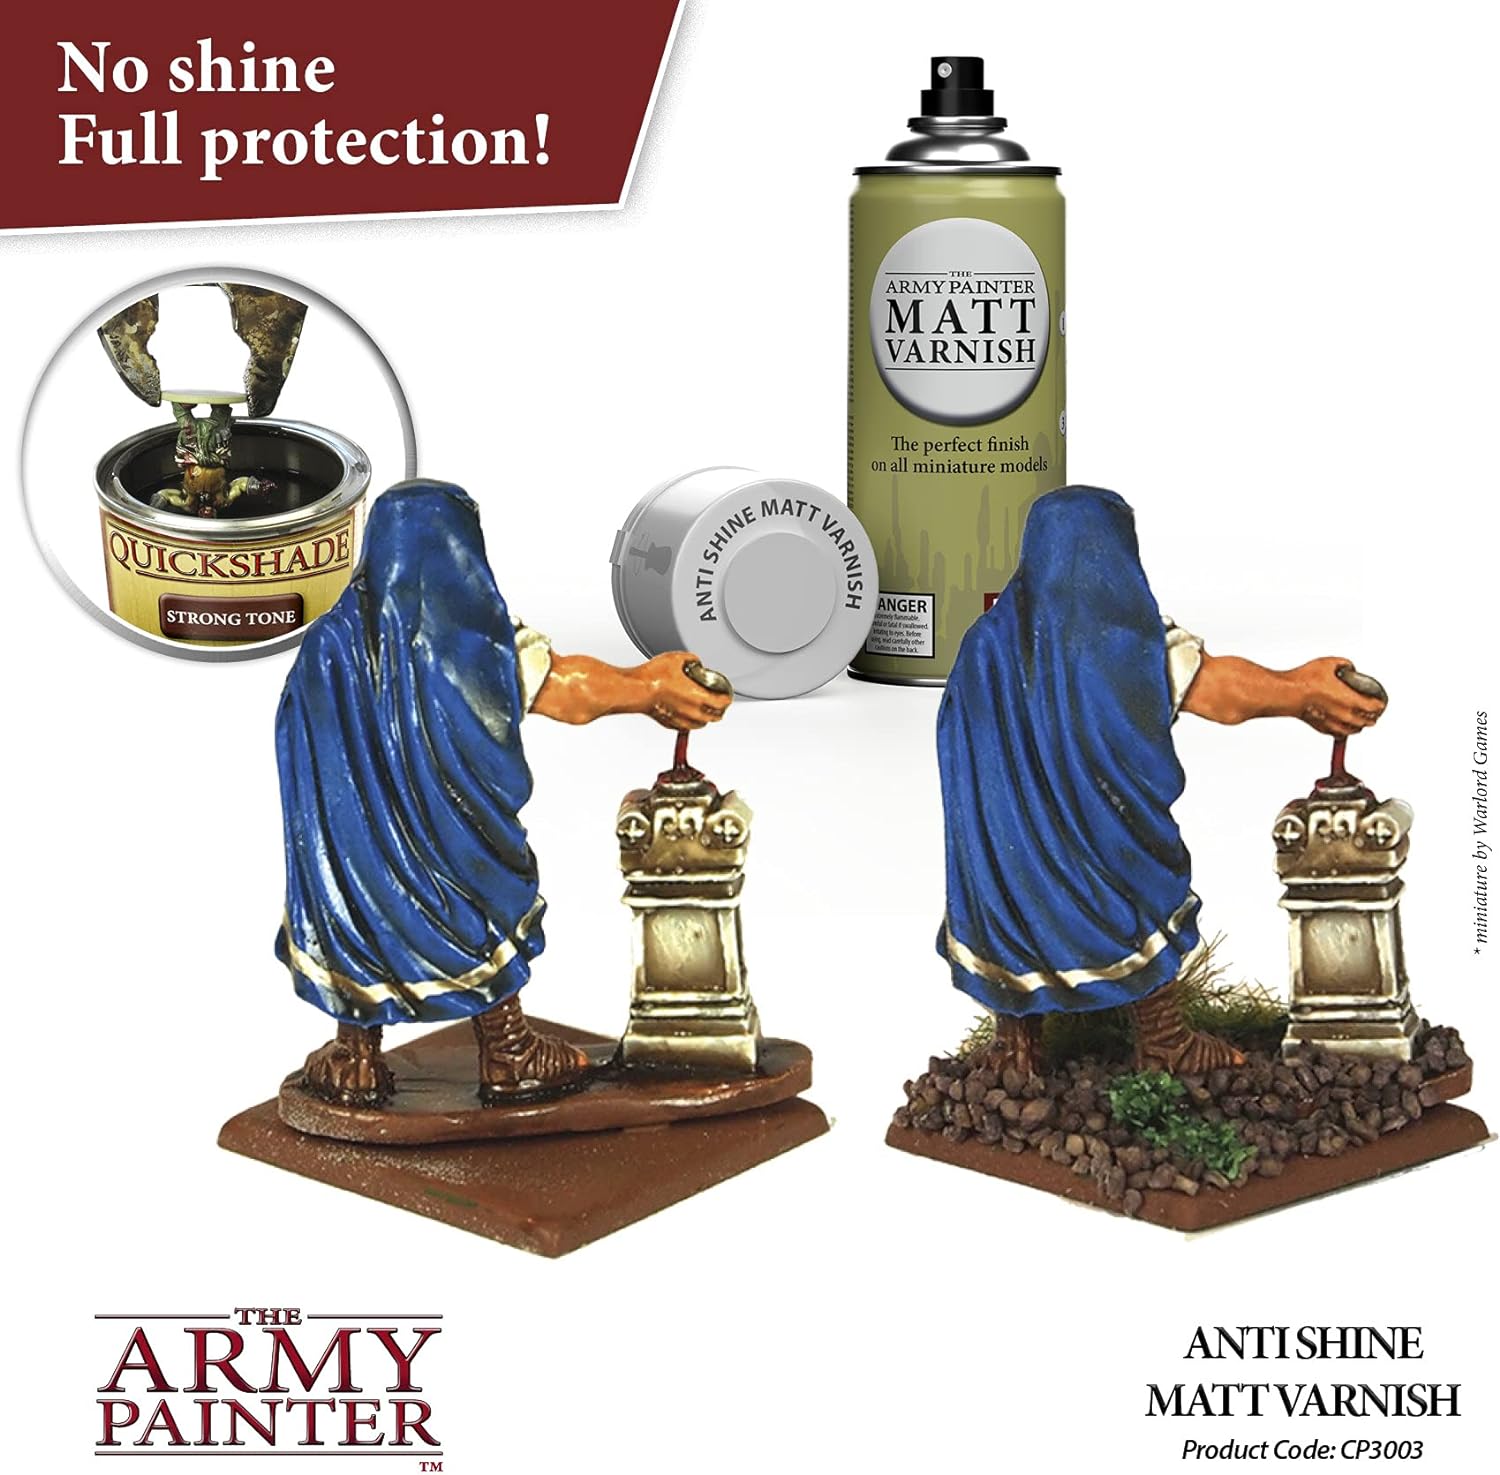 The Army Painter Aegis Suit Satin Varnish Spray for Miniature Painting - After Quickshade Spray Paint Top Coat Acrylic Varnish - Satin Finish Spray for Acrylic Model Paint, 400ml Can